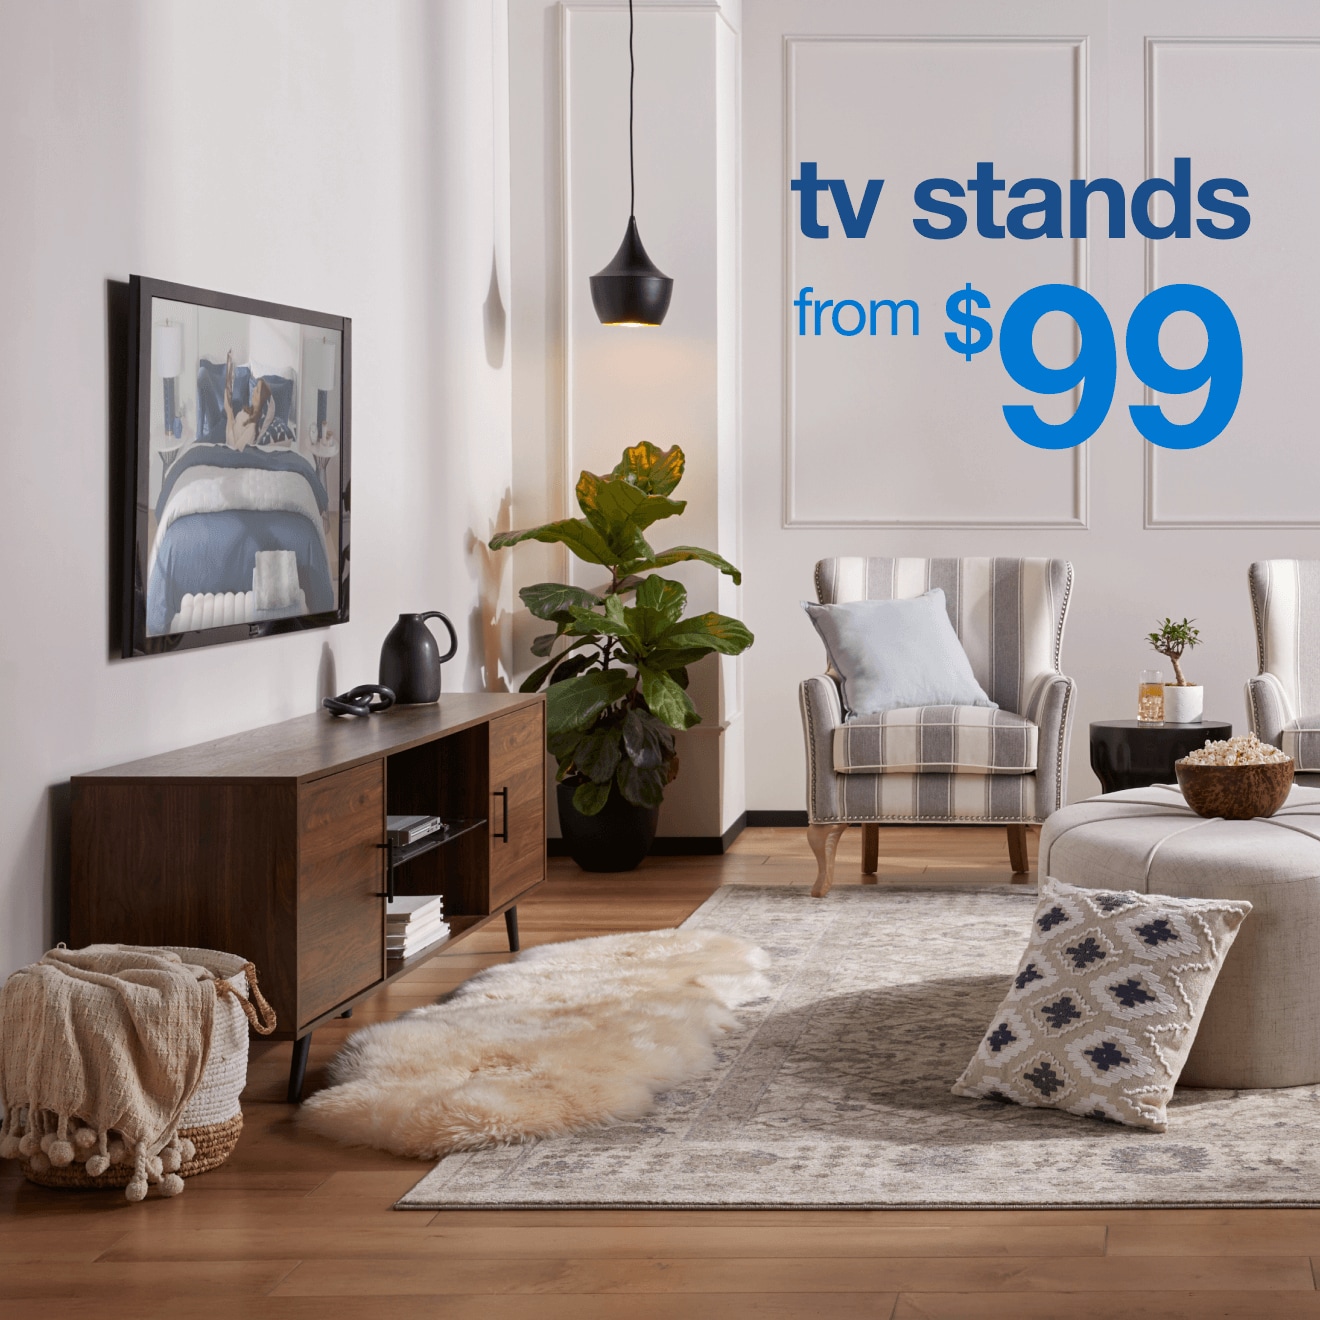 TV stands from $99